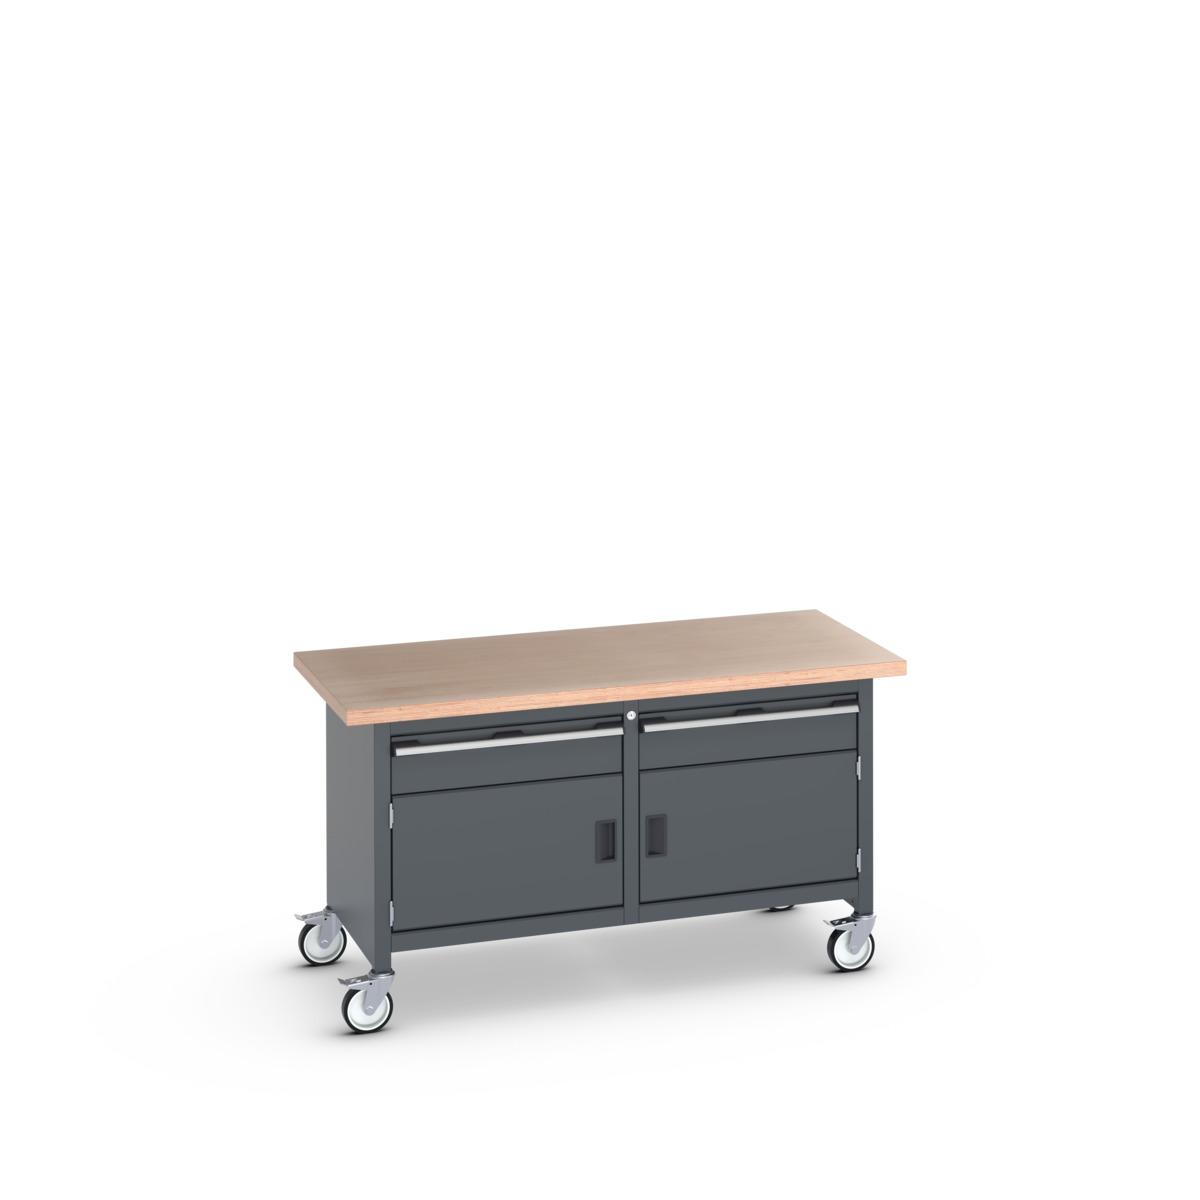 41002103.77V - cubio mobile storage bench (mpx)